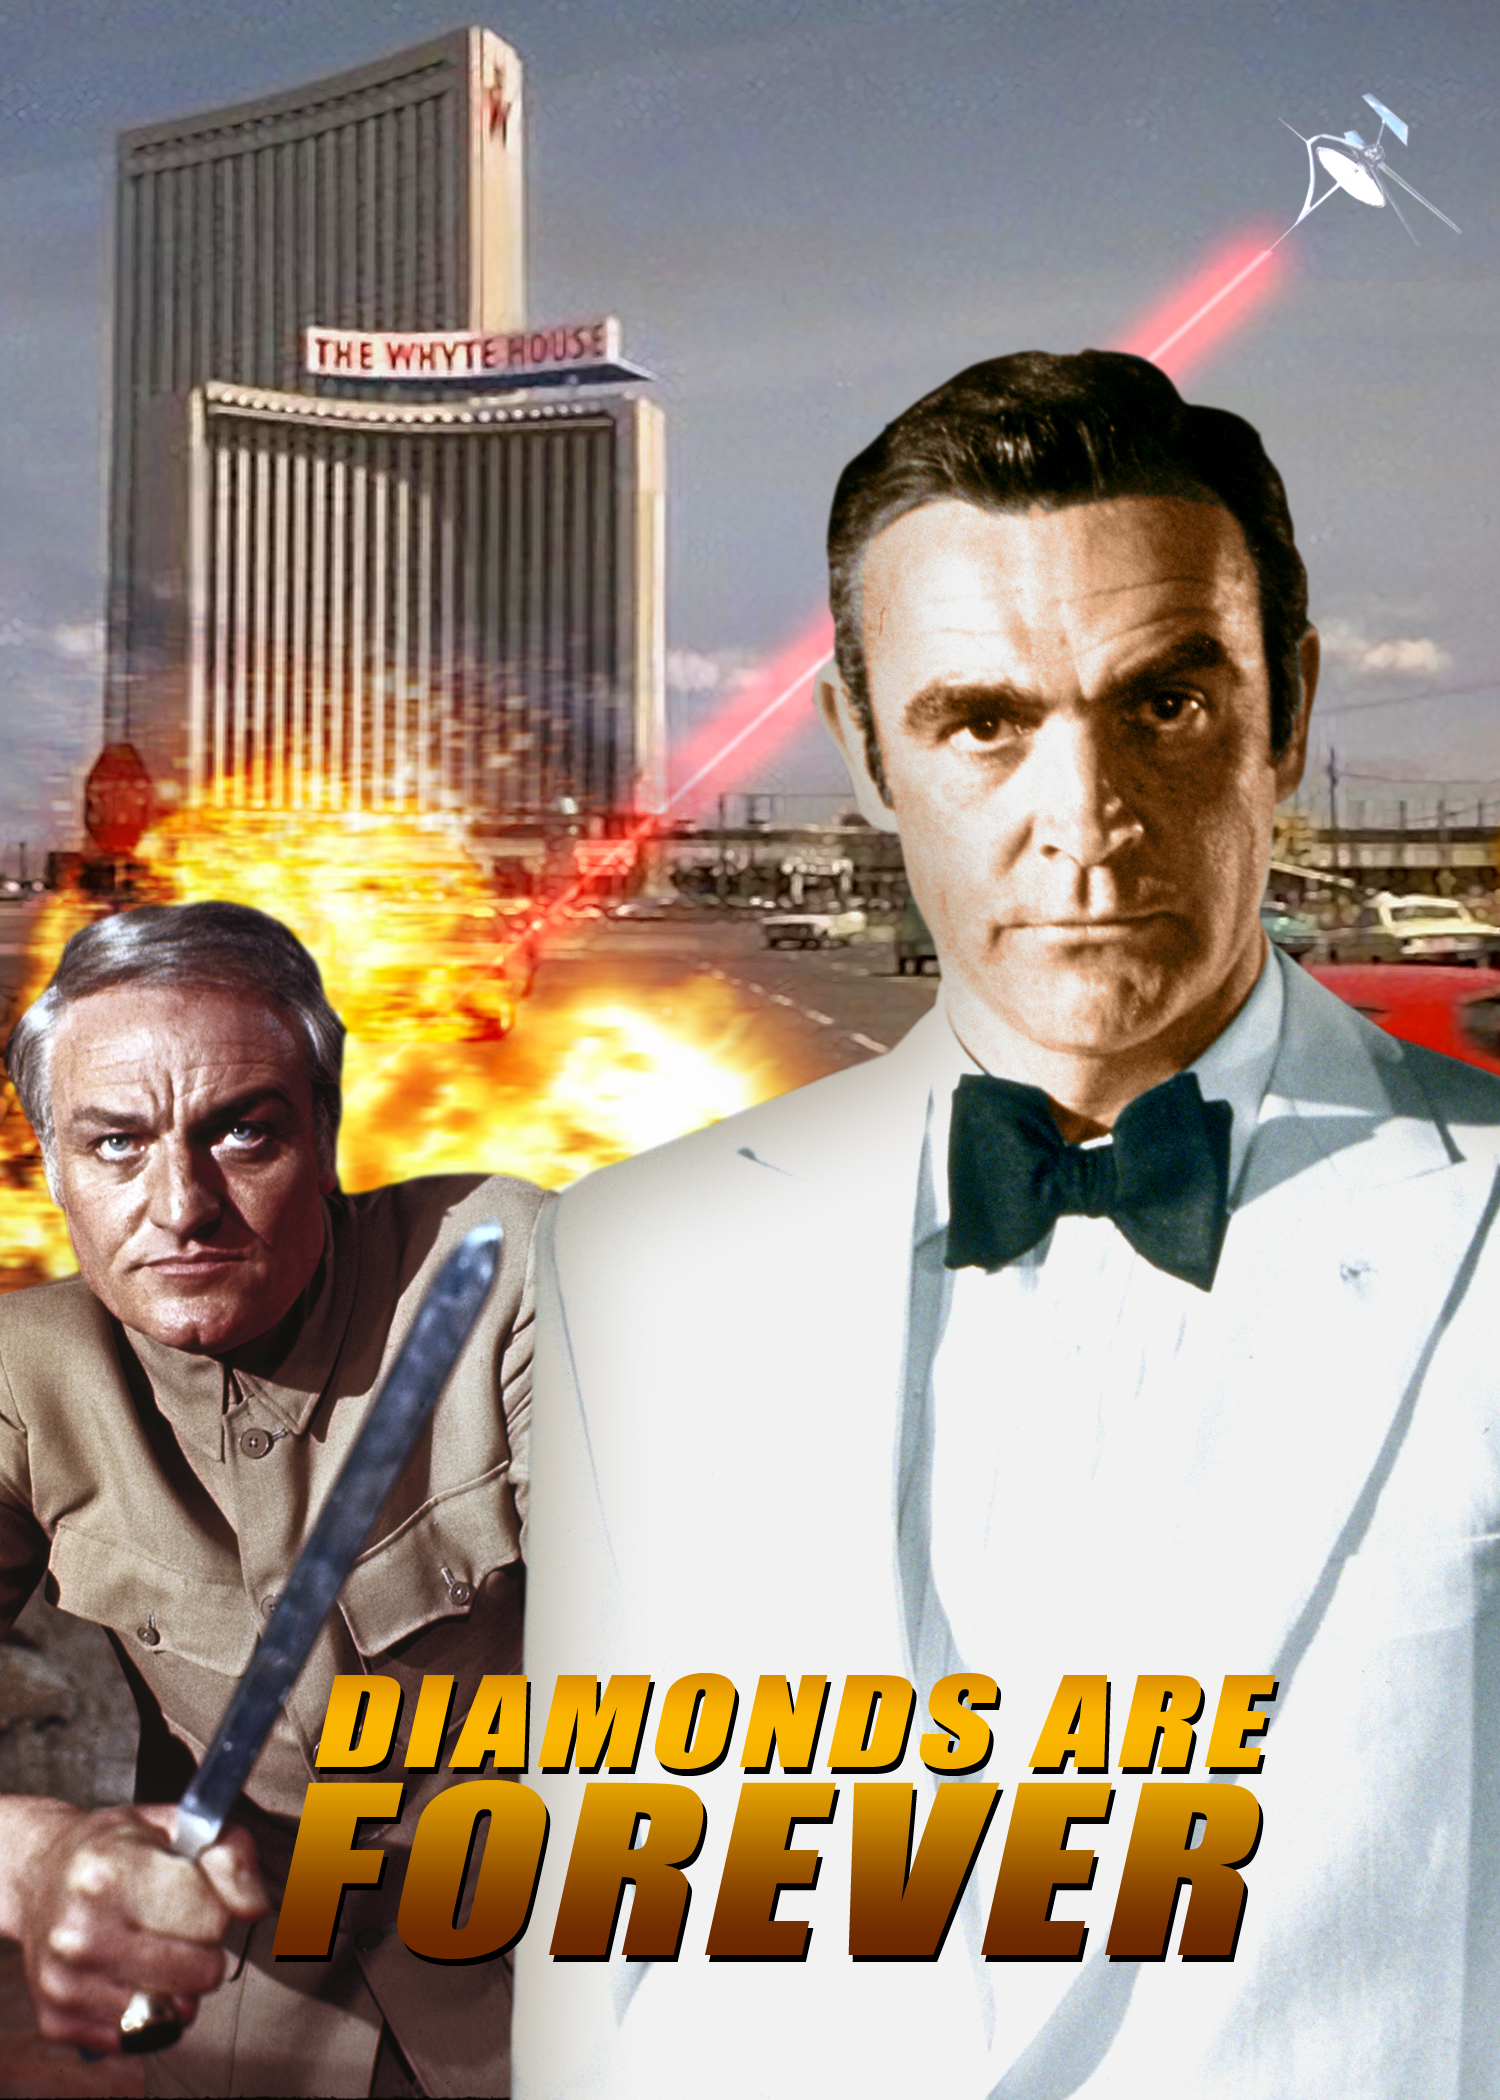 diamonds_are_forever_poster_by_comandercool22-d686tij.jpg